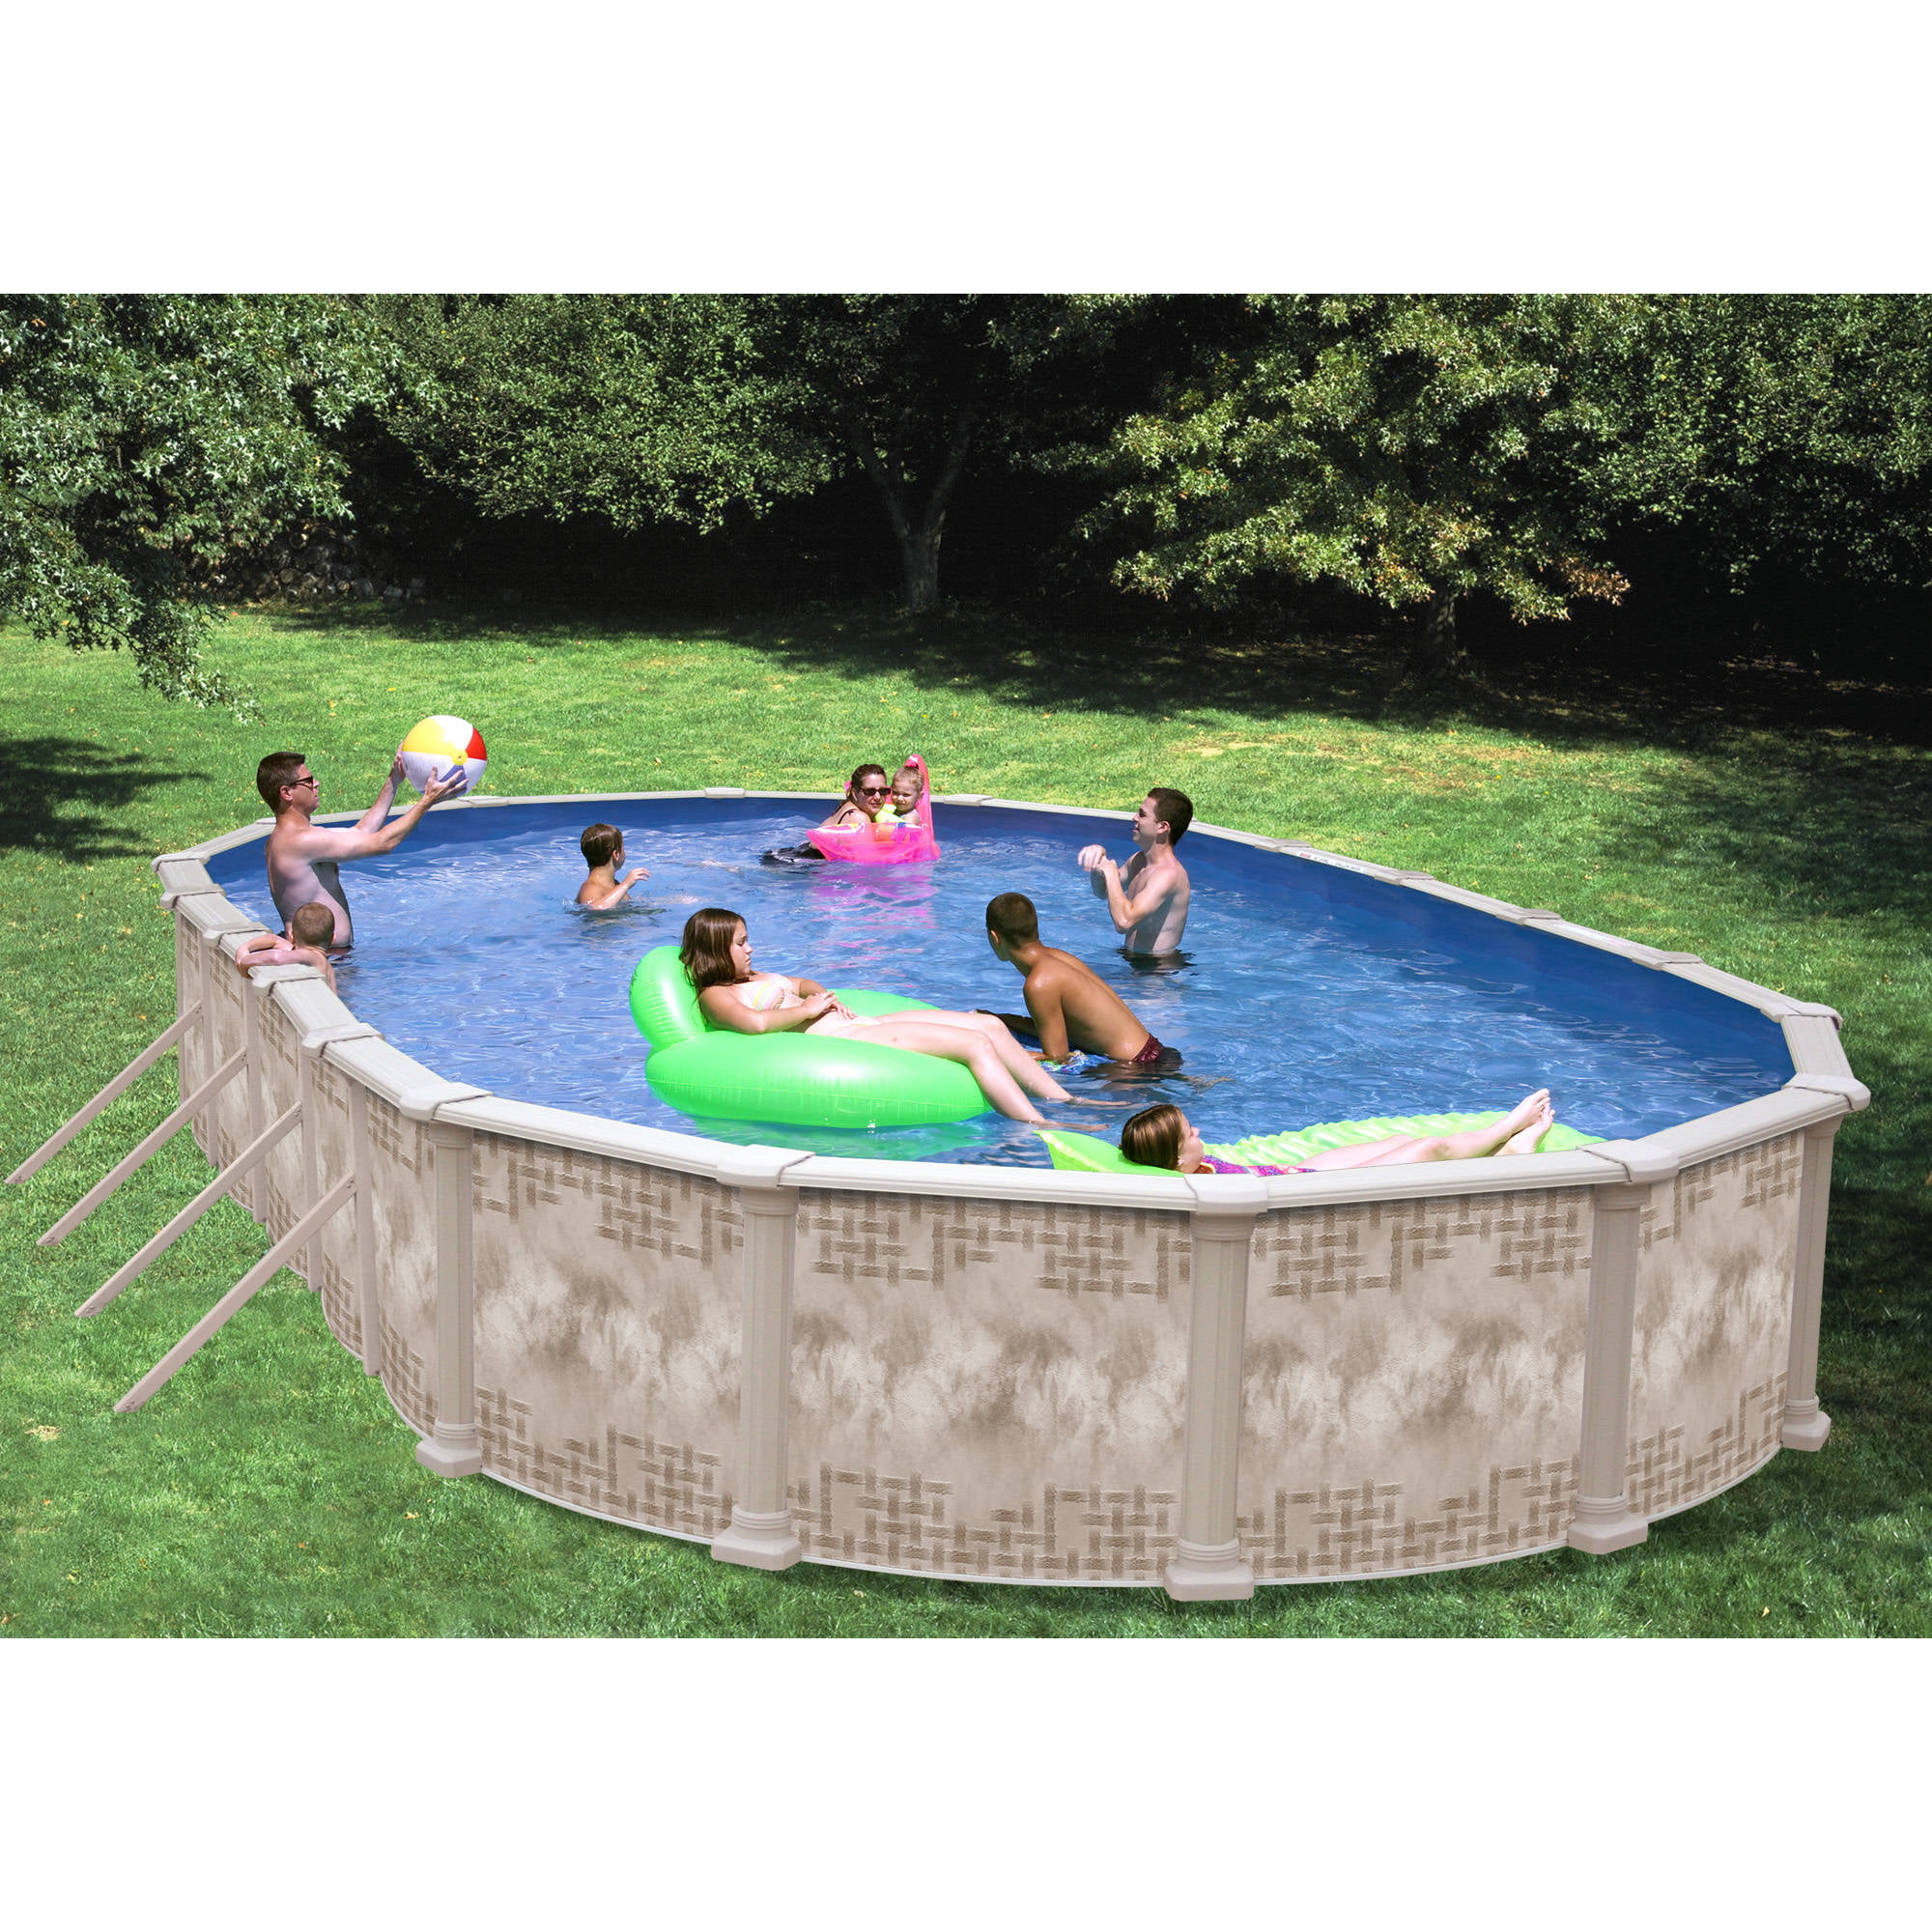 Heritage Oval 30' x 15' x 52'' Above Ground Swimming Pool with Vinyl